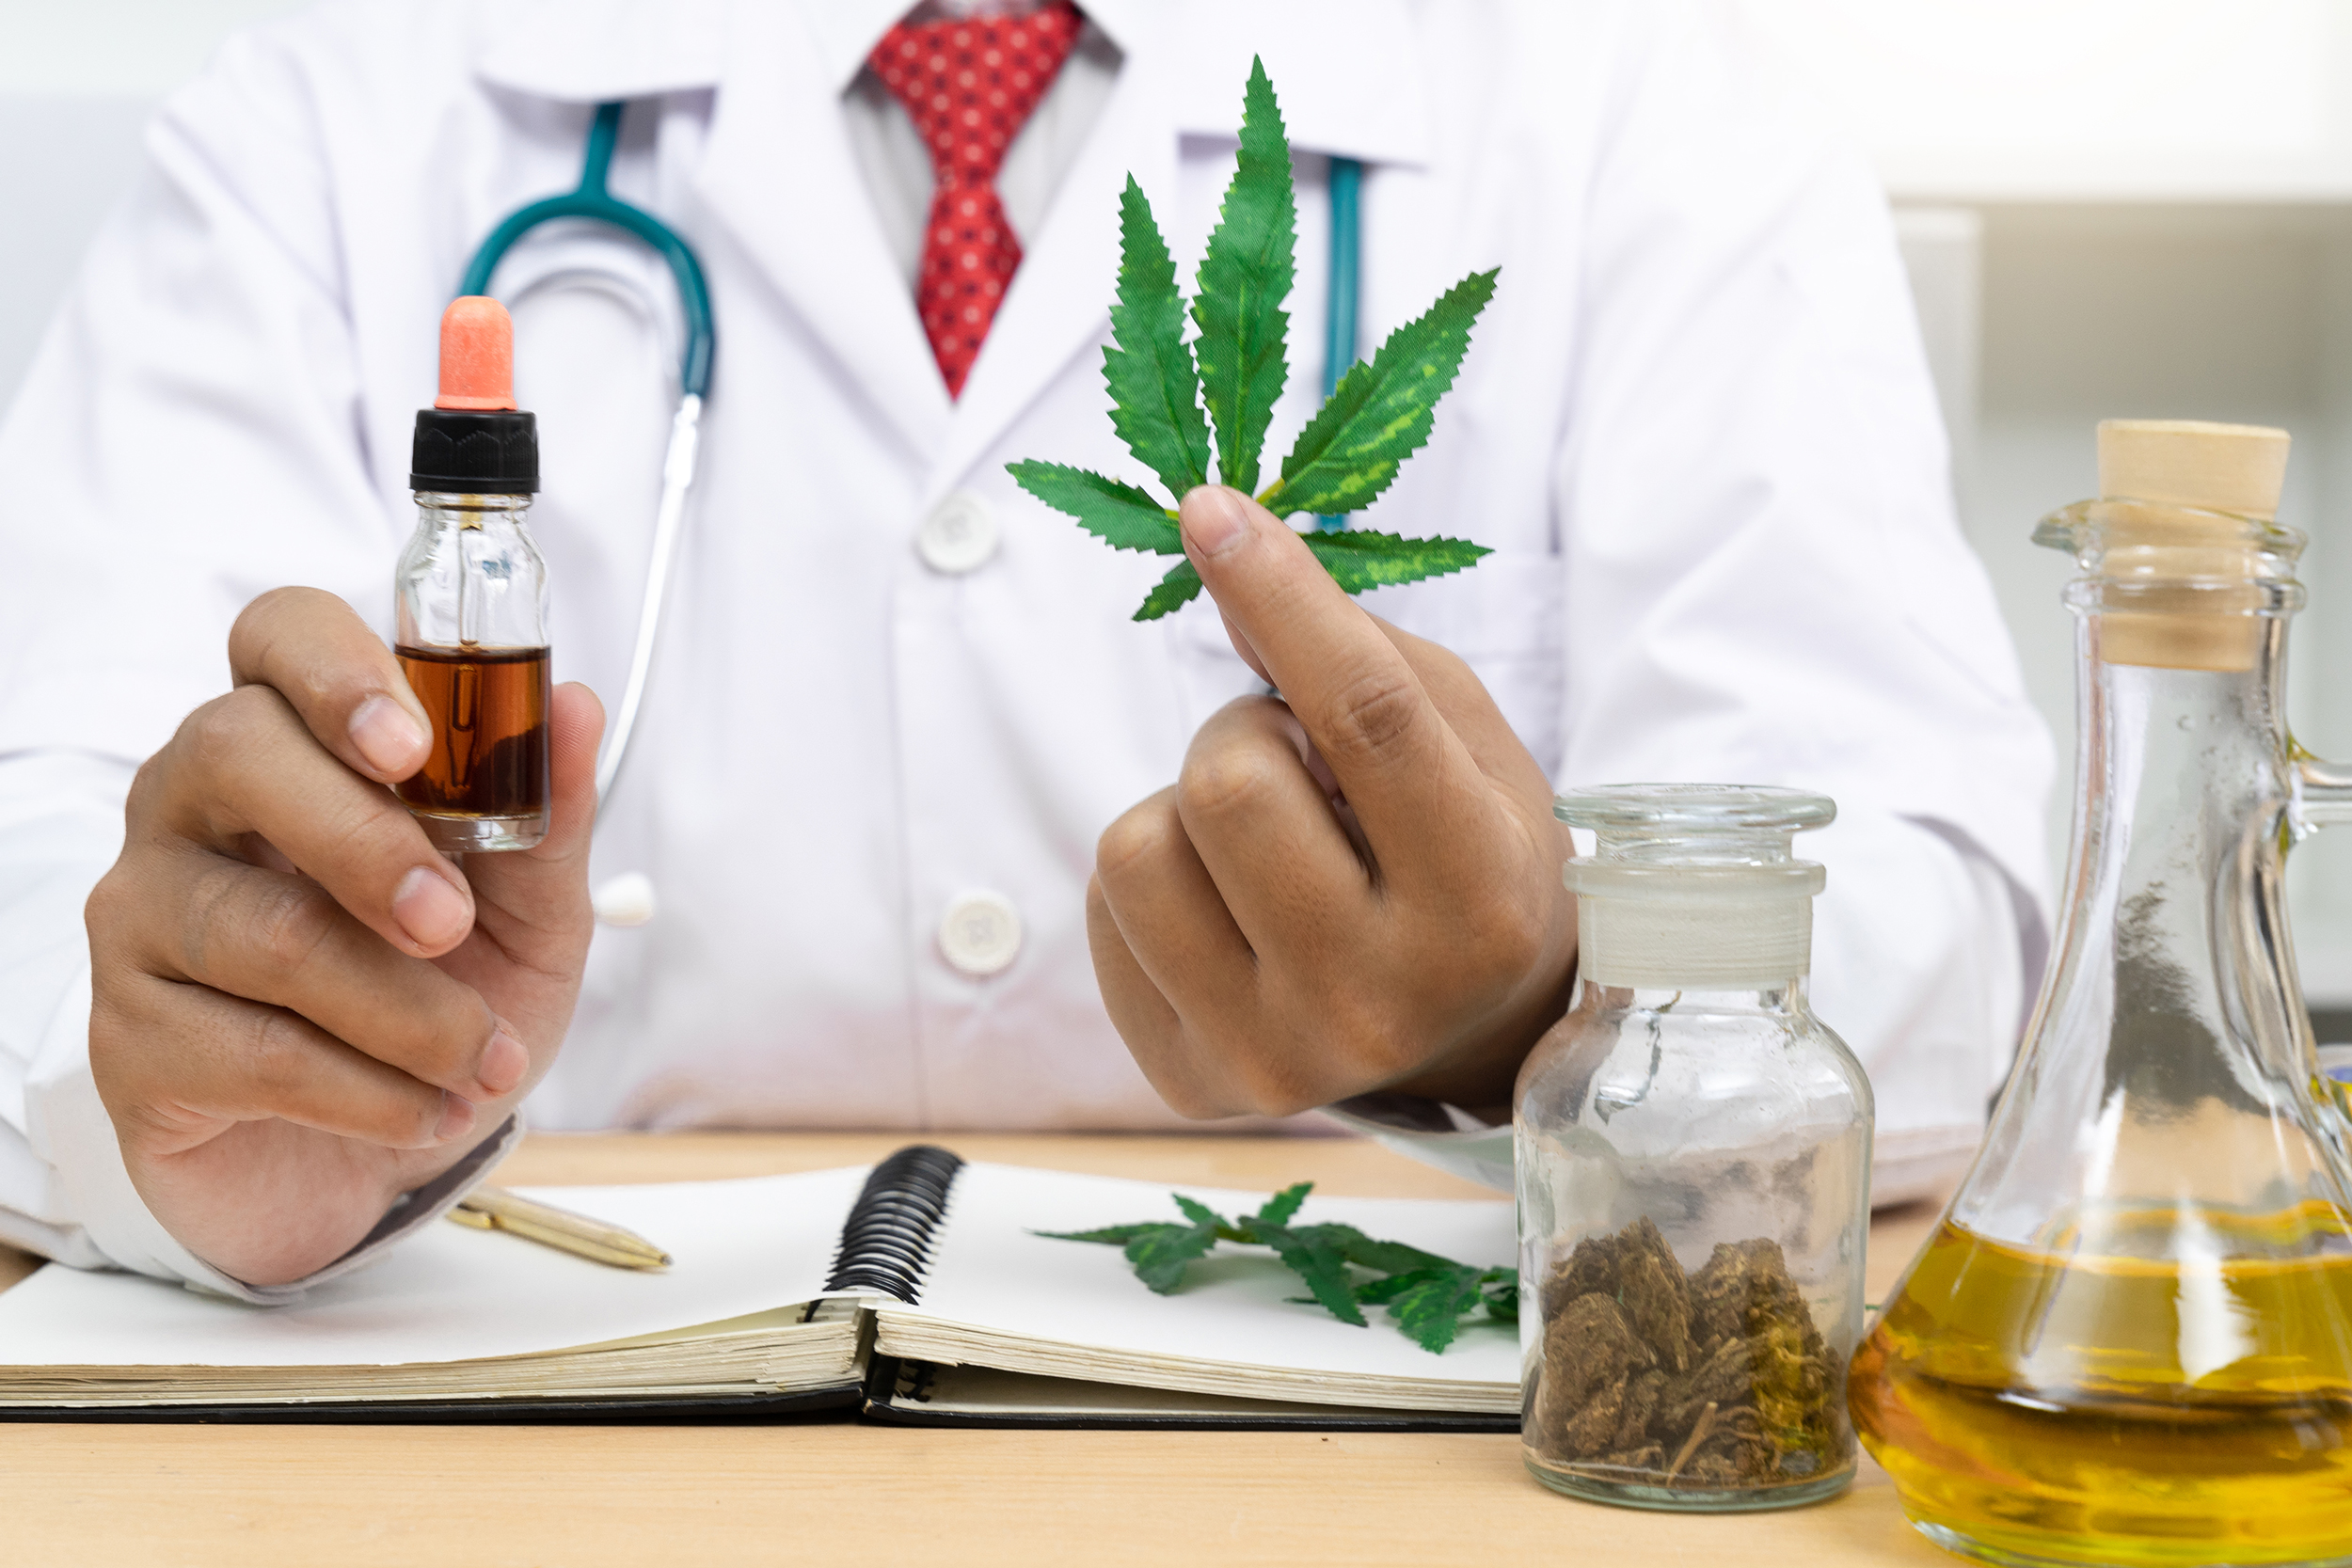 What are the benefits of cannabis for the human body?